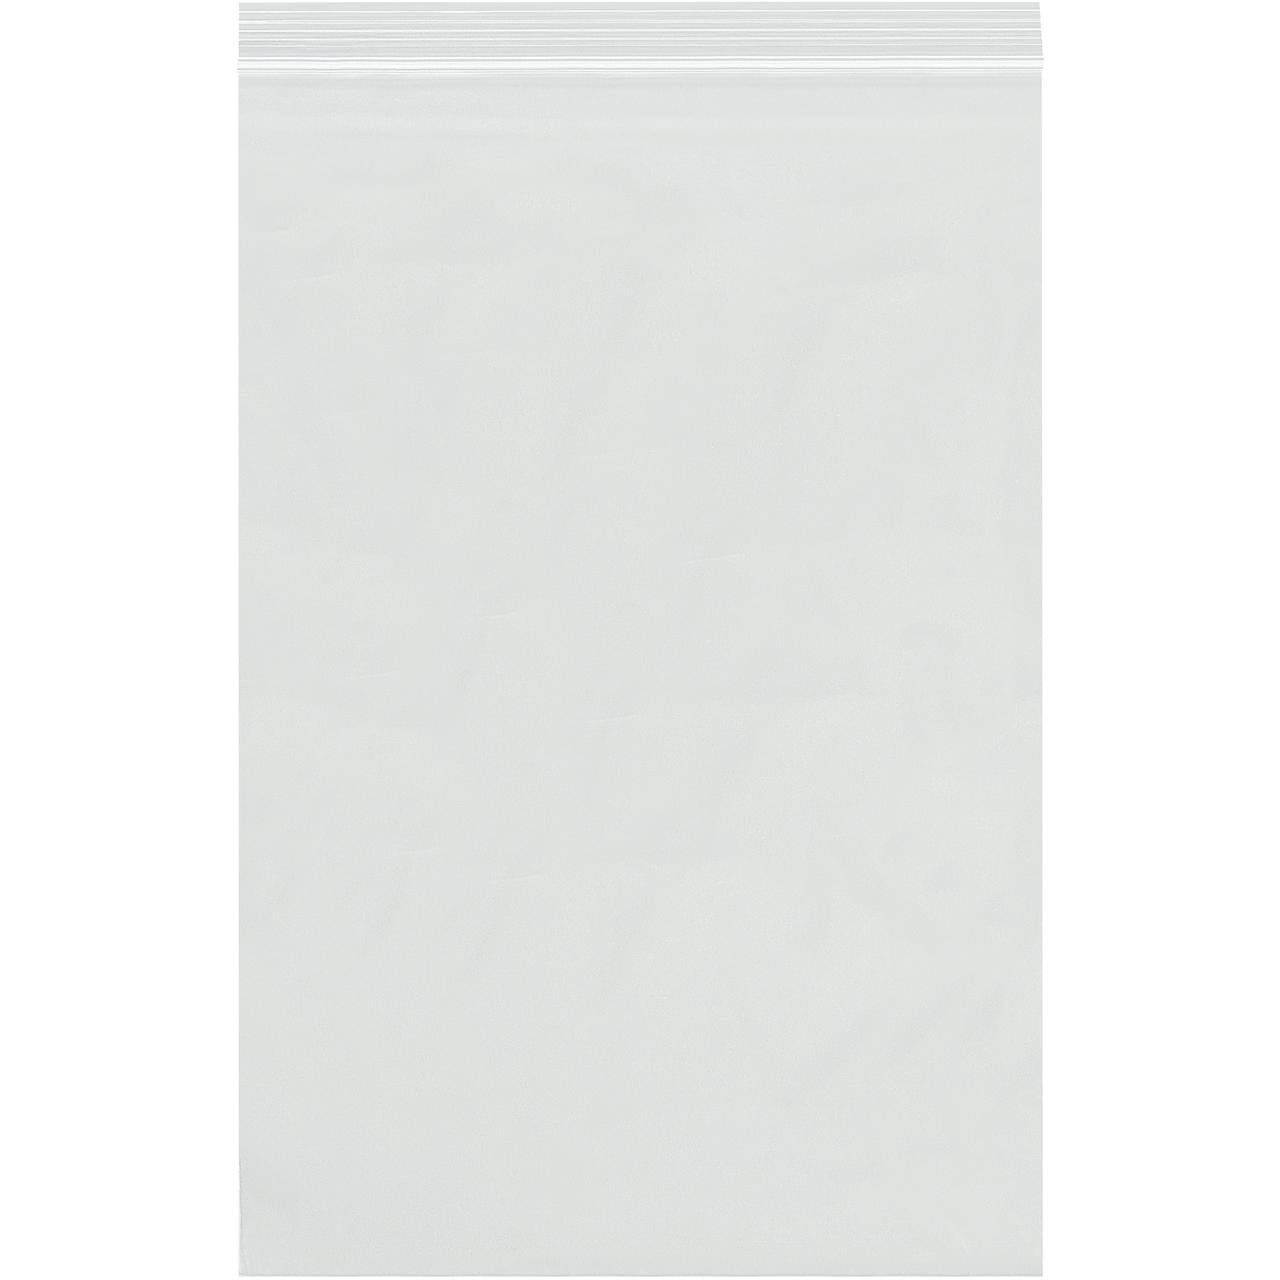 Clear "Flat 4 Mil Poly Bags 250/Case" 16"" x 24"" 